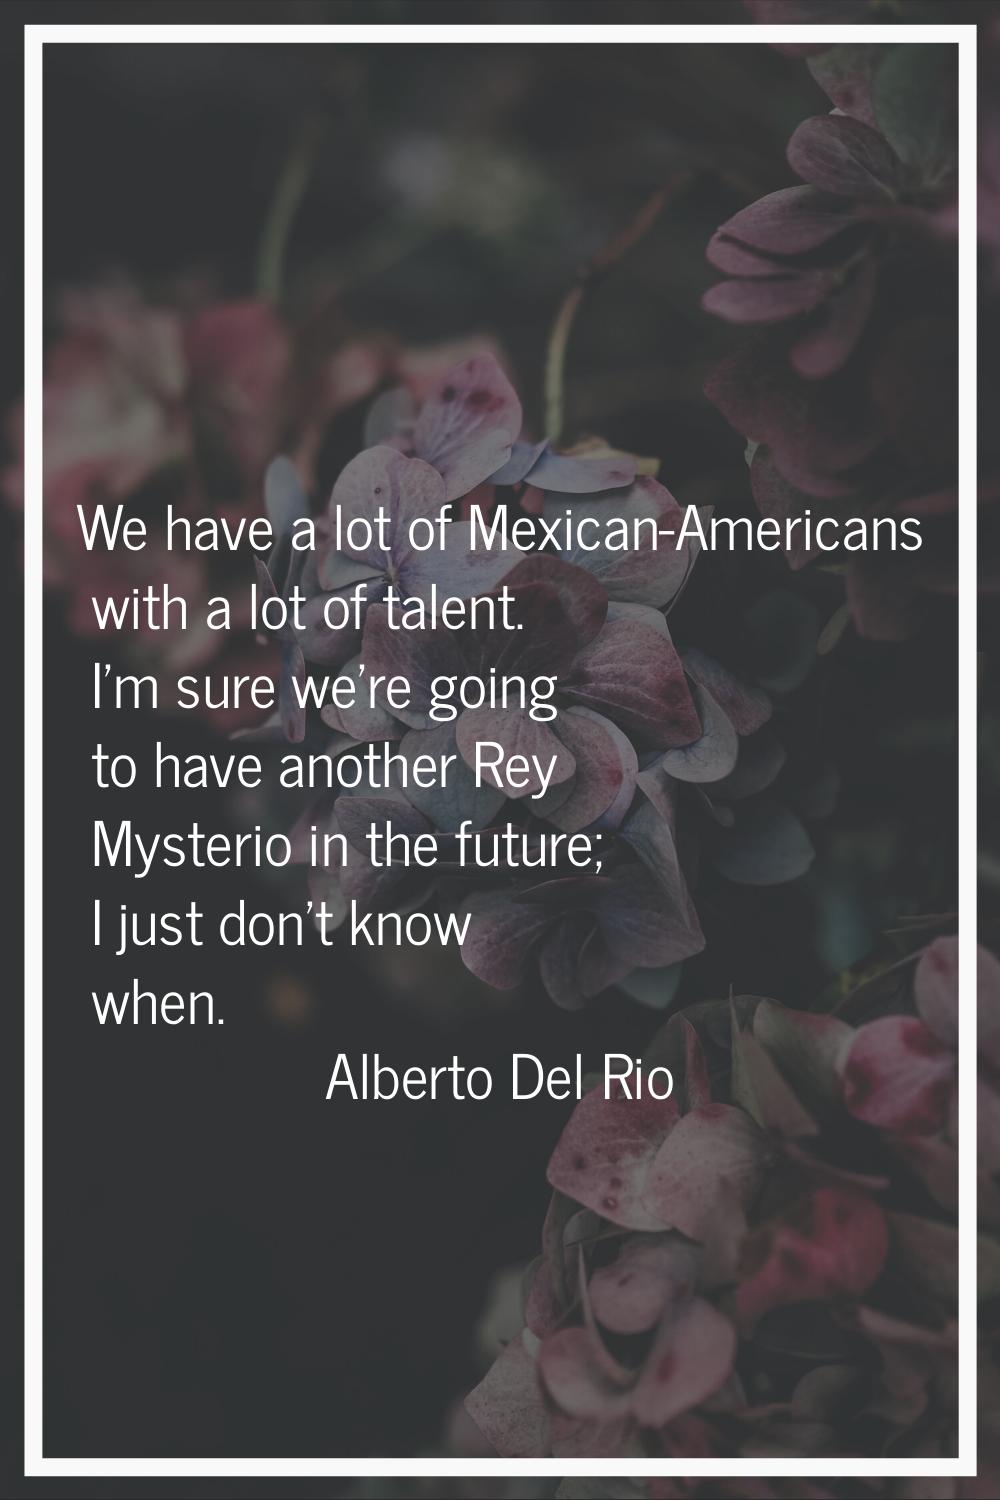 We have a lot of Mexican-Americans with a lot of talent. I'm sure we're going to have another Rey M